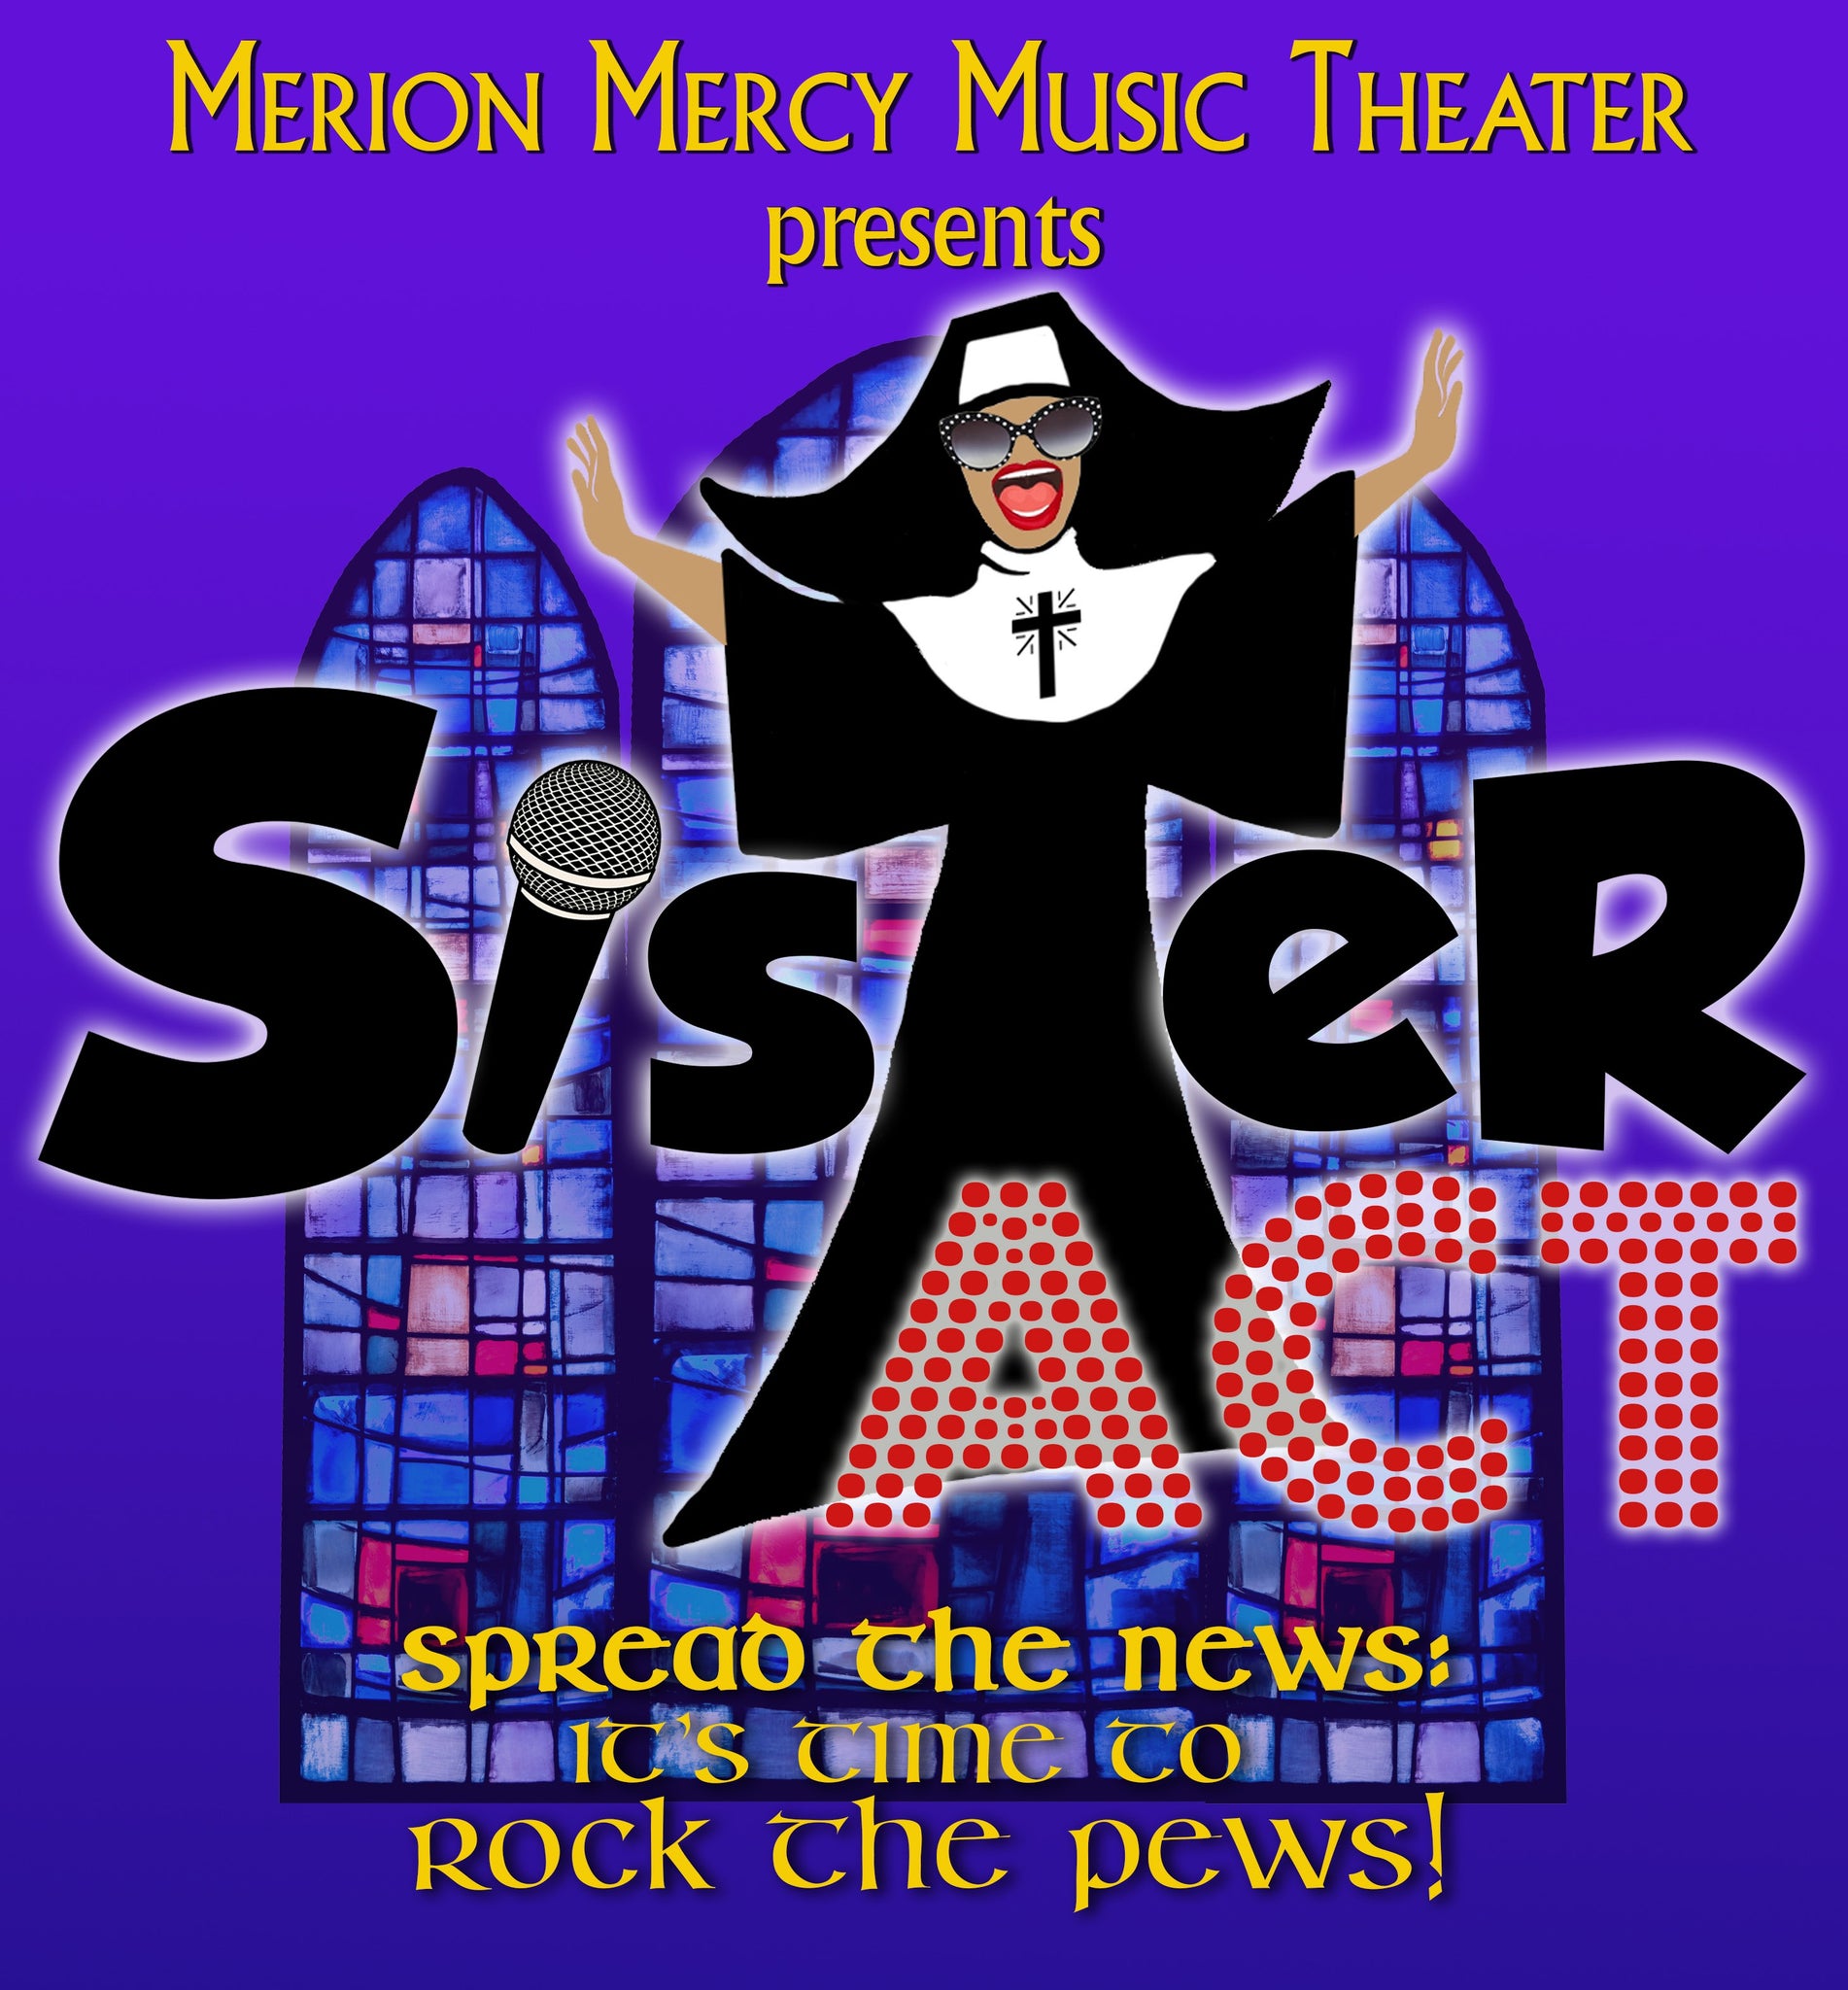 Sister Act performed by Merion Mercy Music Theater (2019) - Active Image Media